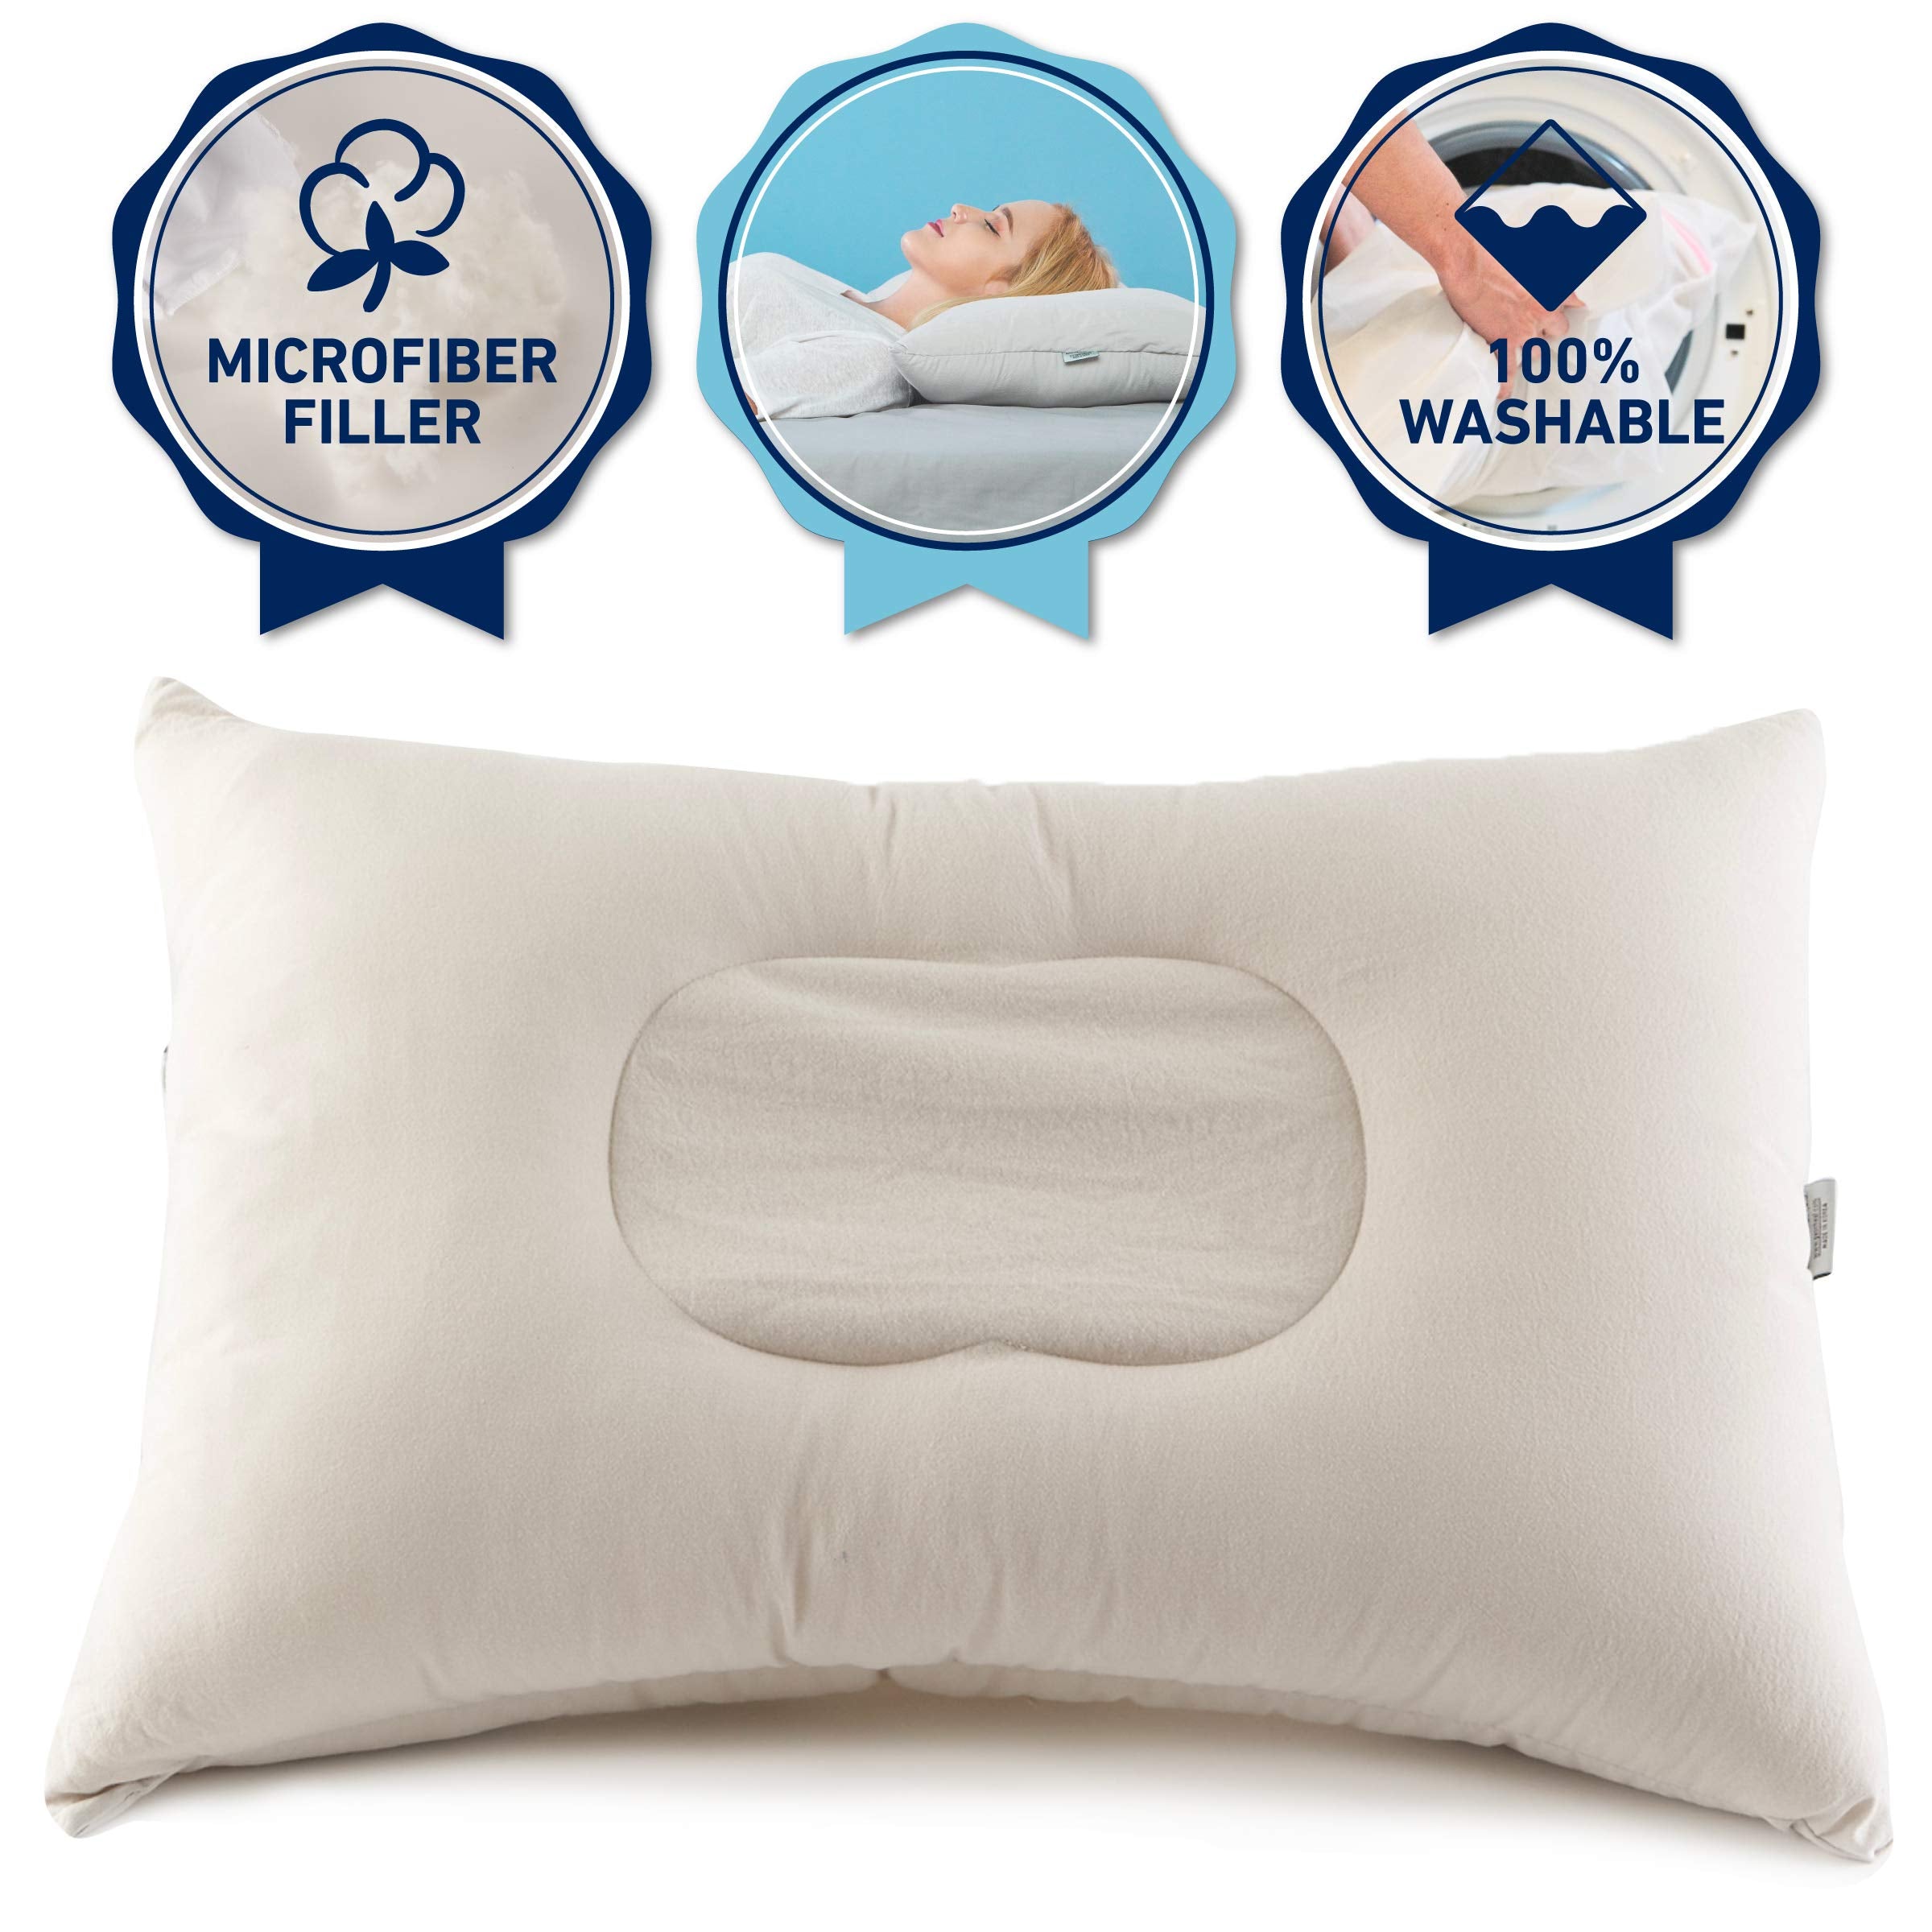 washable pillow